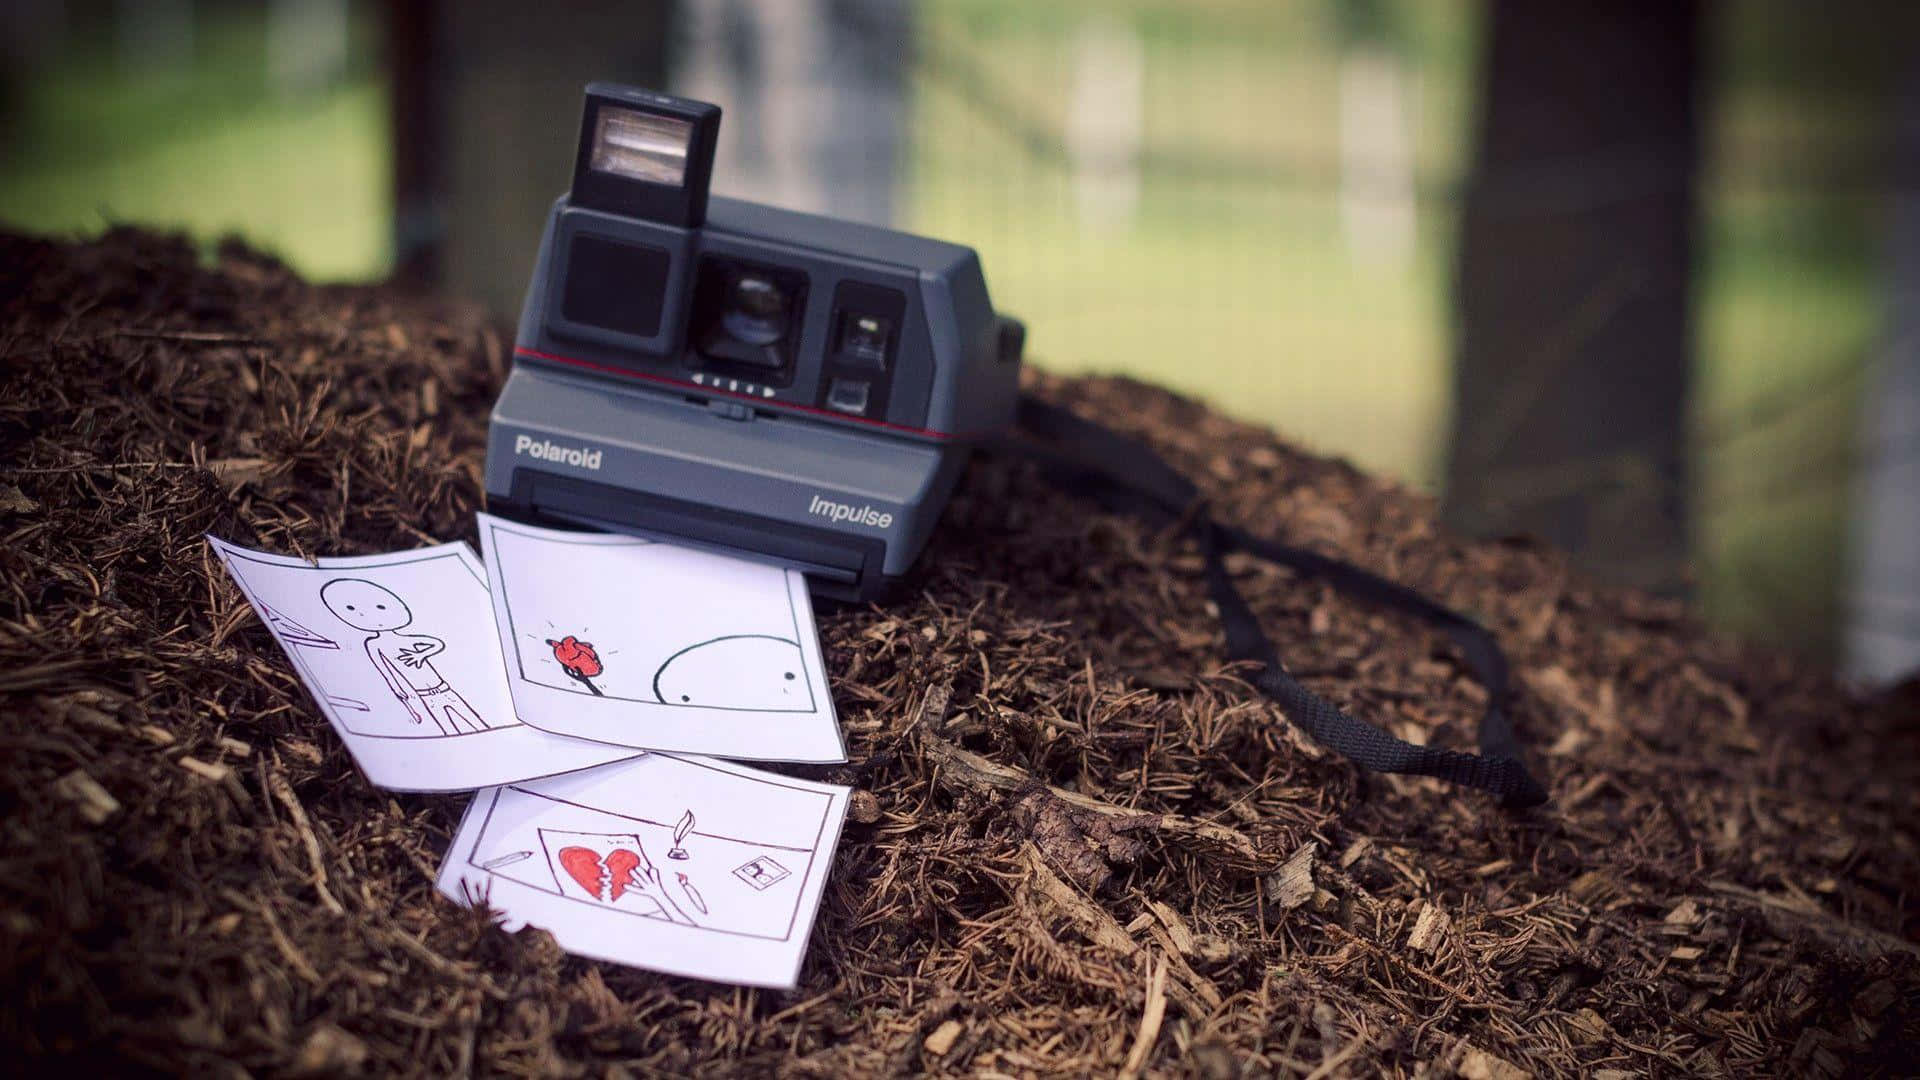 A Polaroid Camera With Papers On It